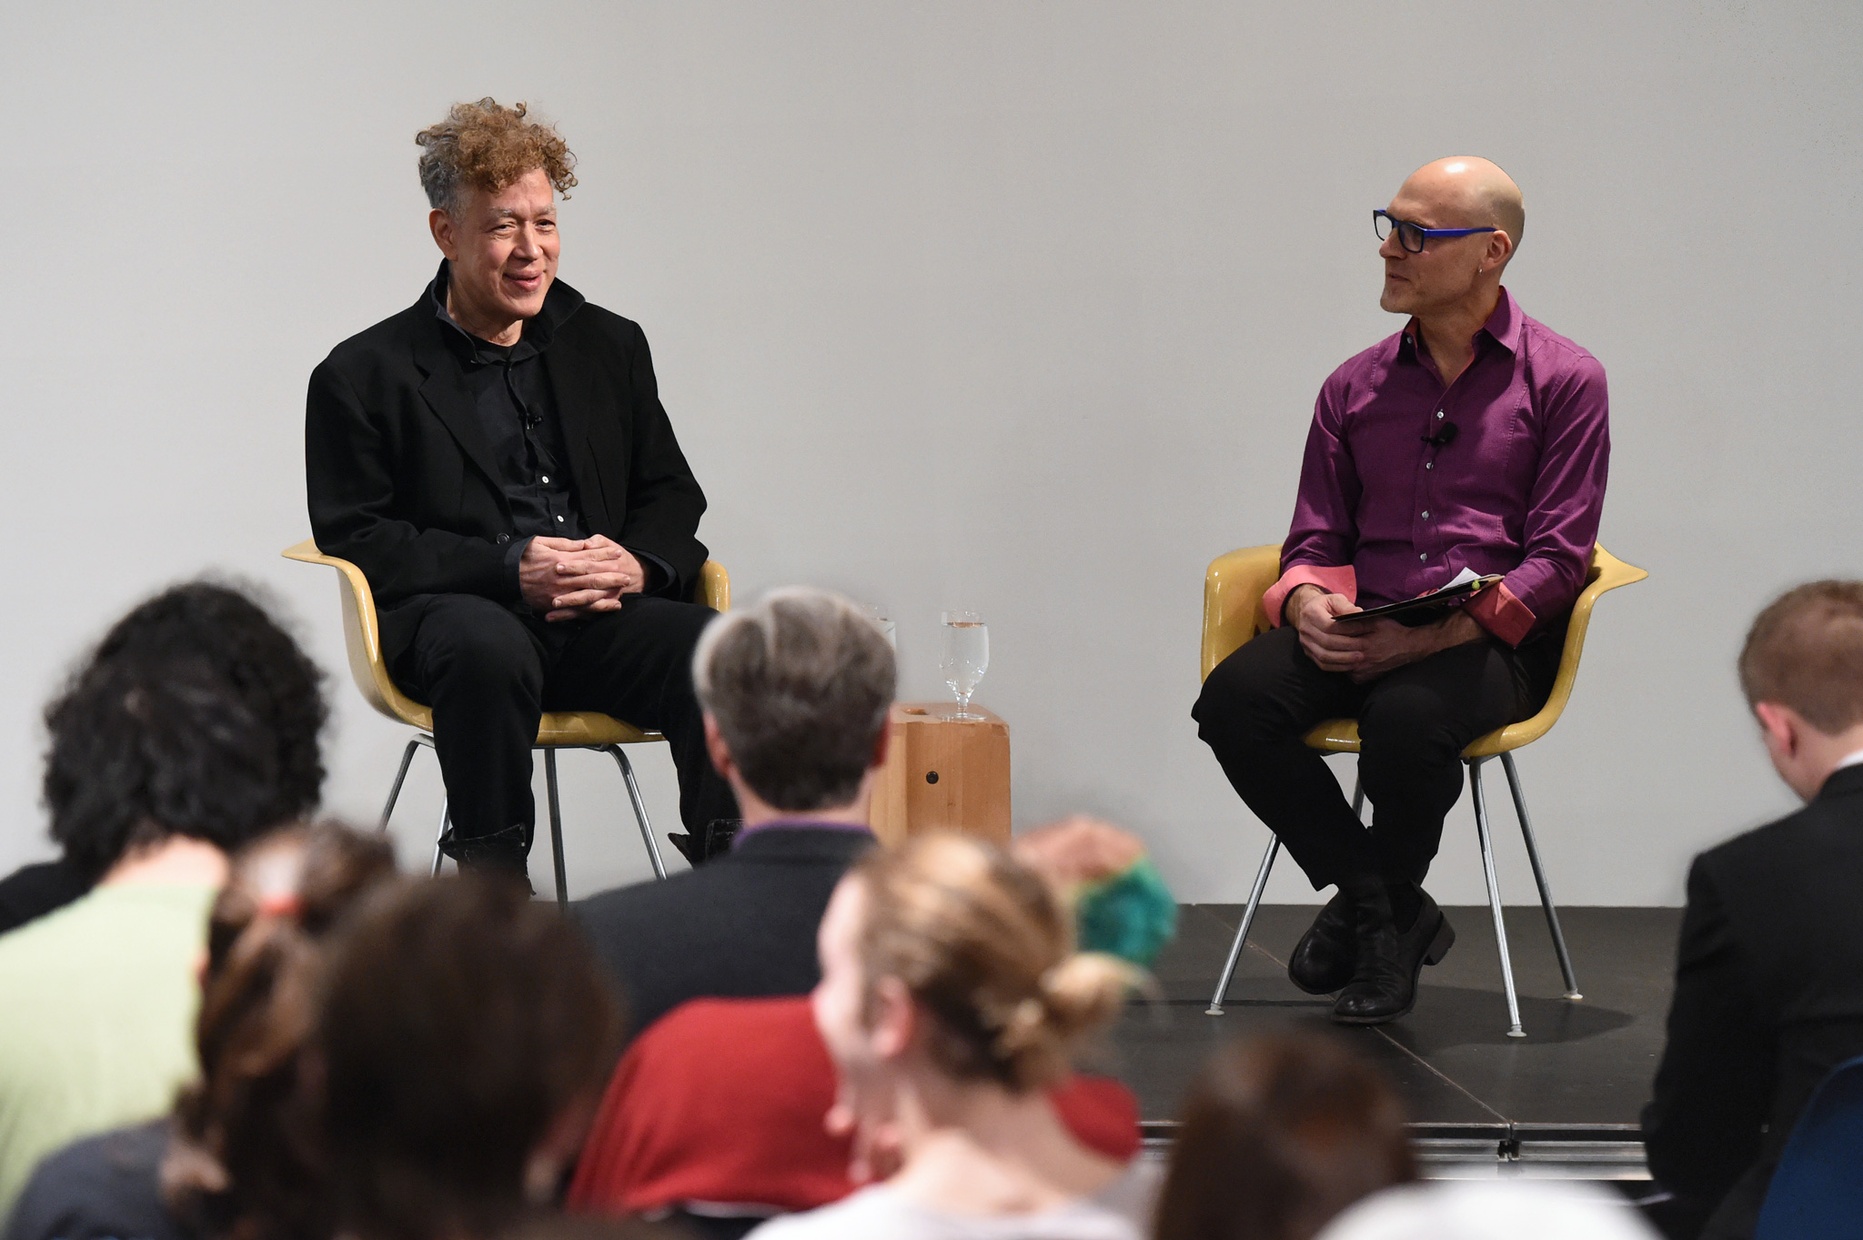 Andres Serrano and Robert ParkHarrison sit in front of an audience during a discussion